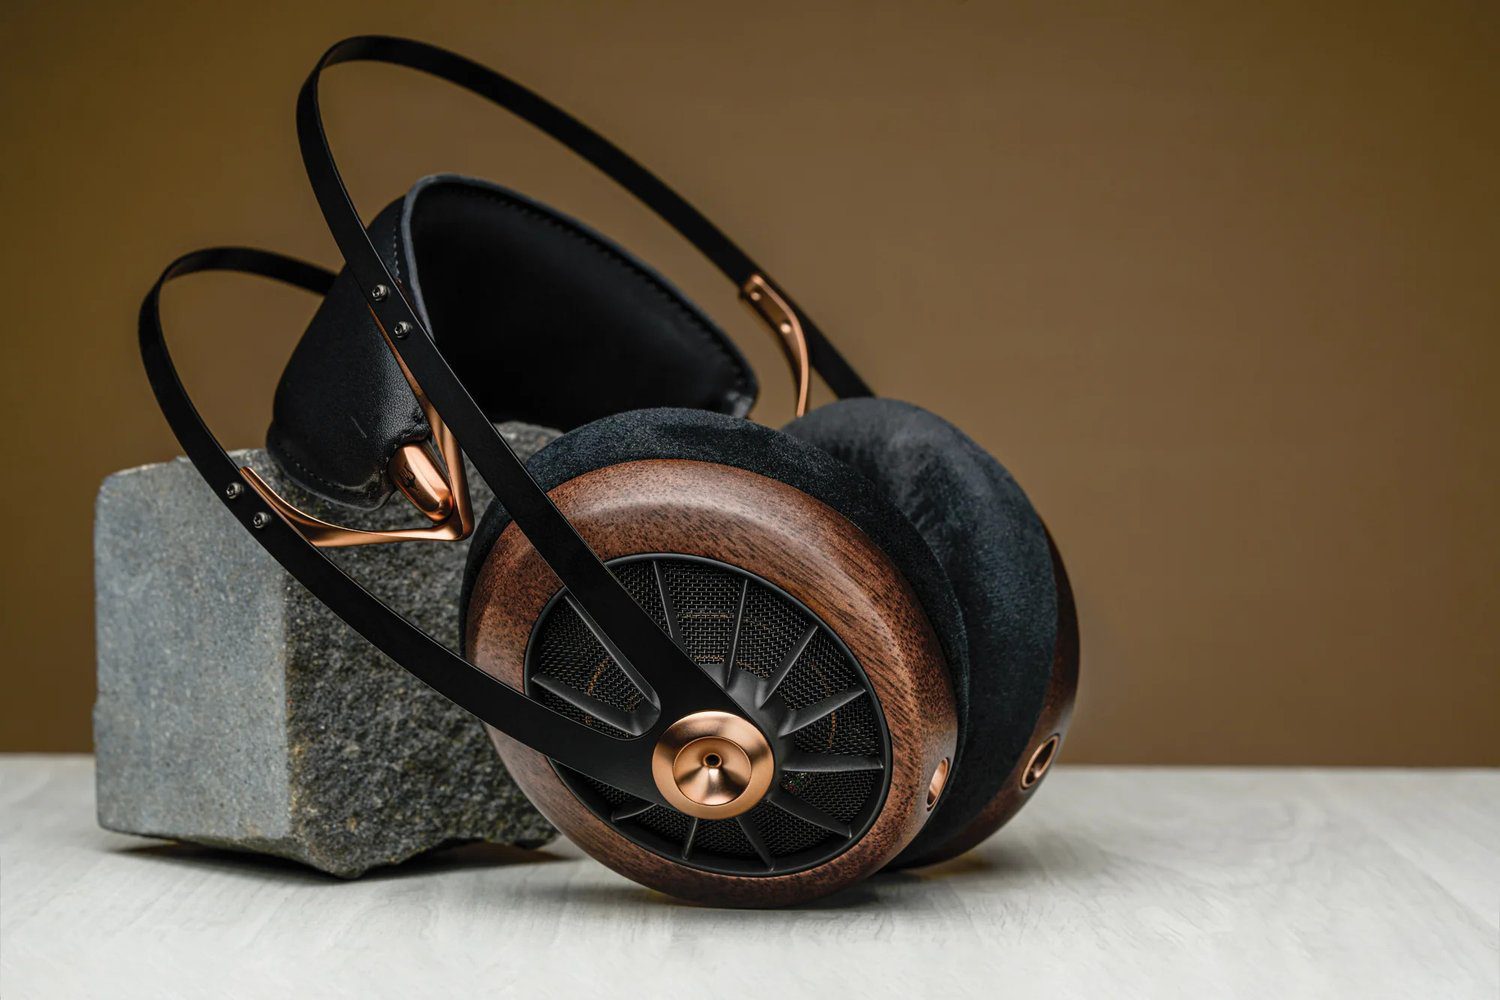 Meze Audio Releases its first Dynamic Open-Back Headphones, the 109 PRO